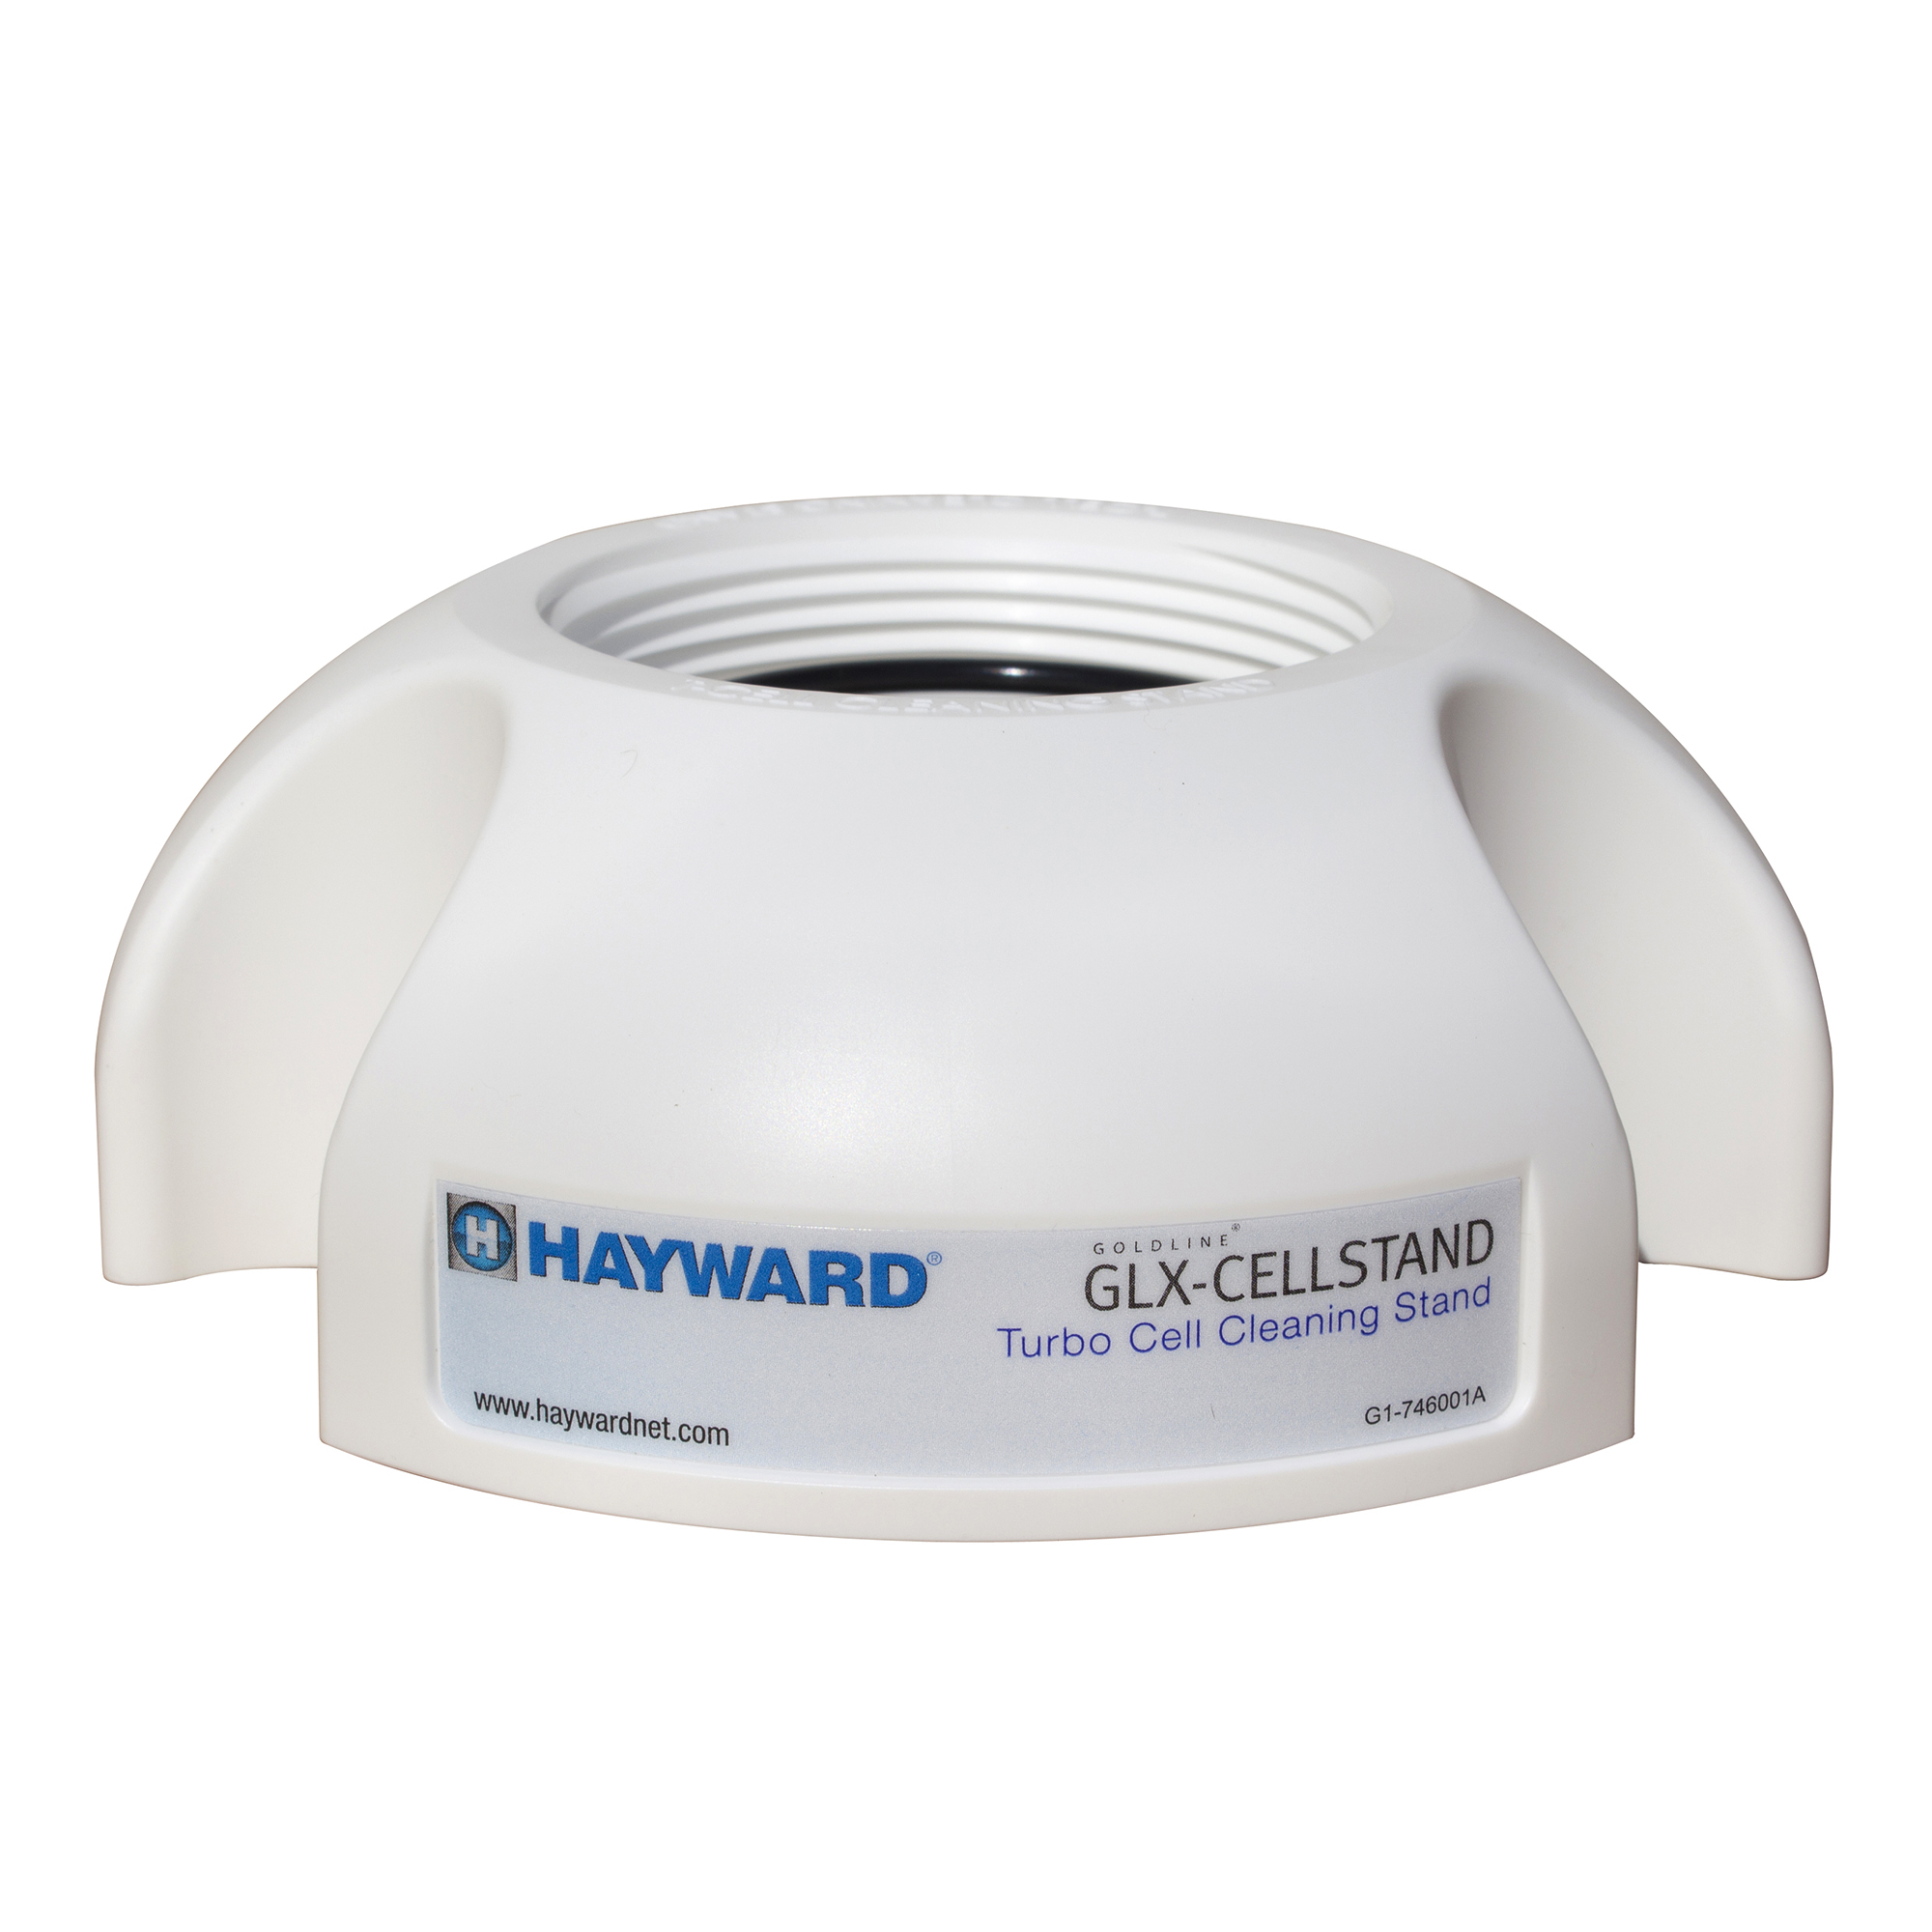 Cell Cleaning Stand GLX-CELLSTAND Compatible With Hayward ® All Turbo Cell